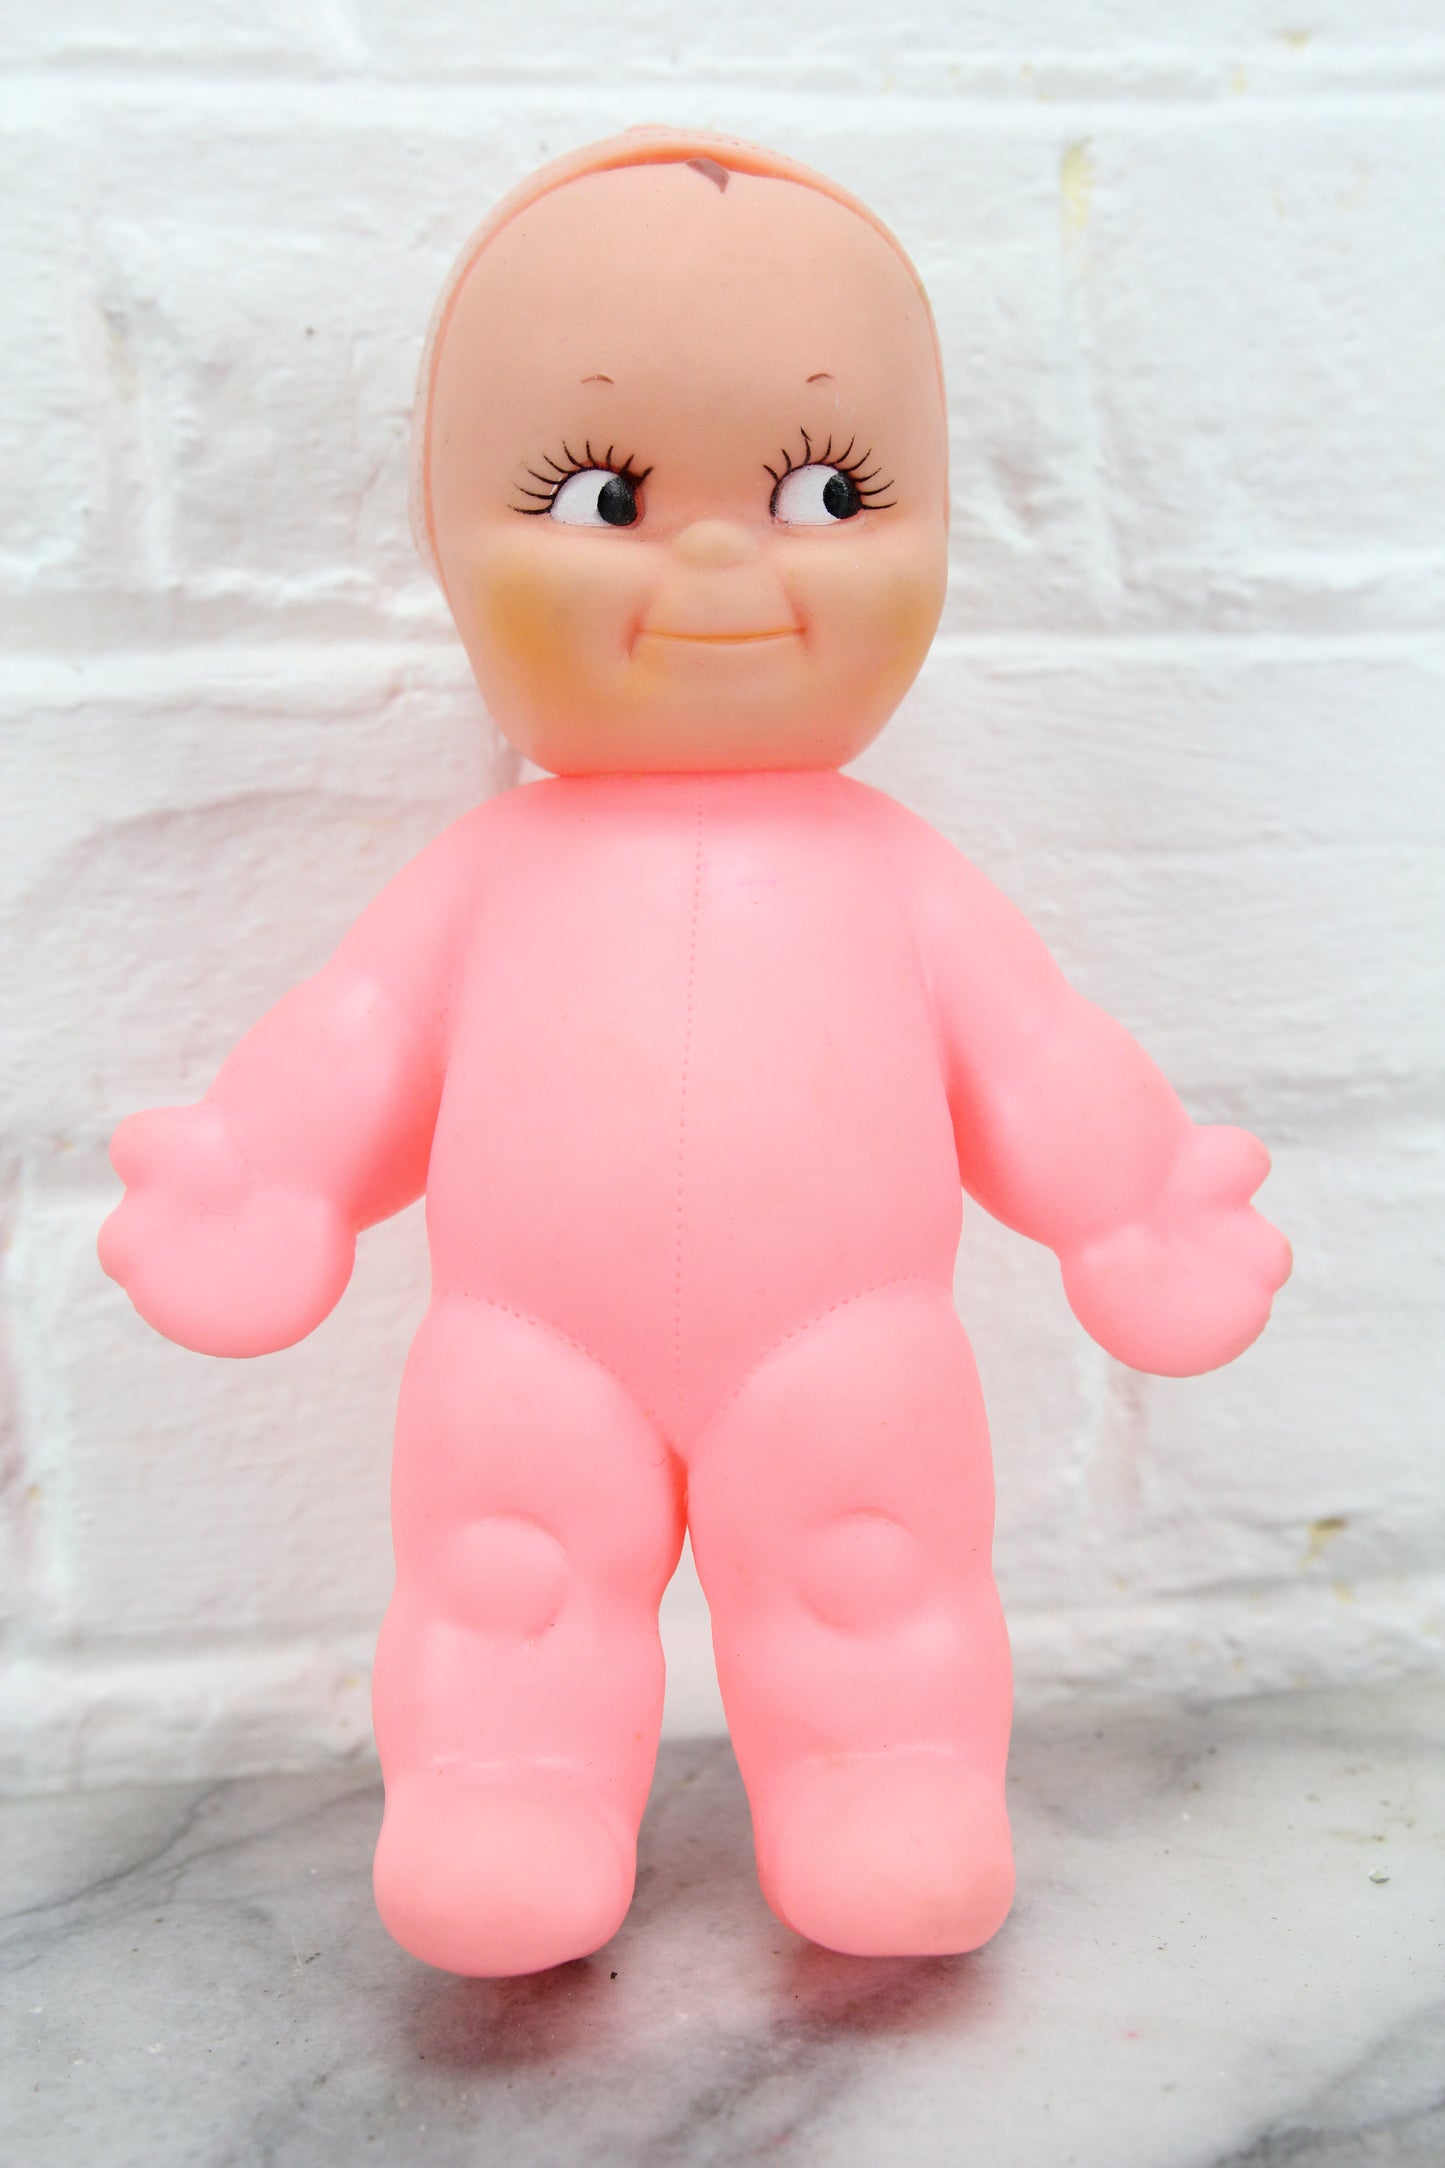 Pink Rubber Kewpie Doll by Cameo, 1963, 8"